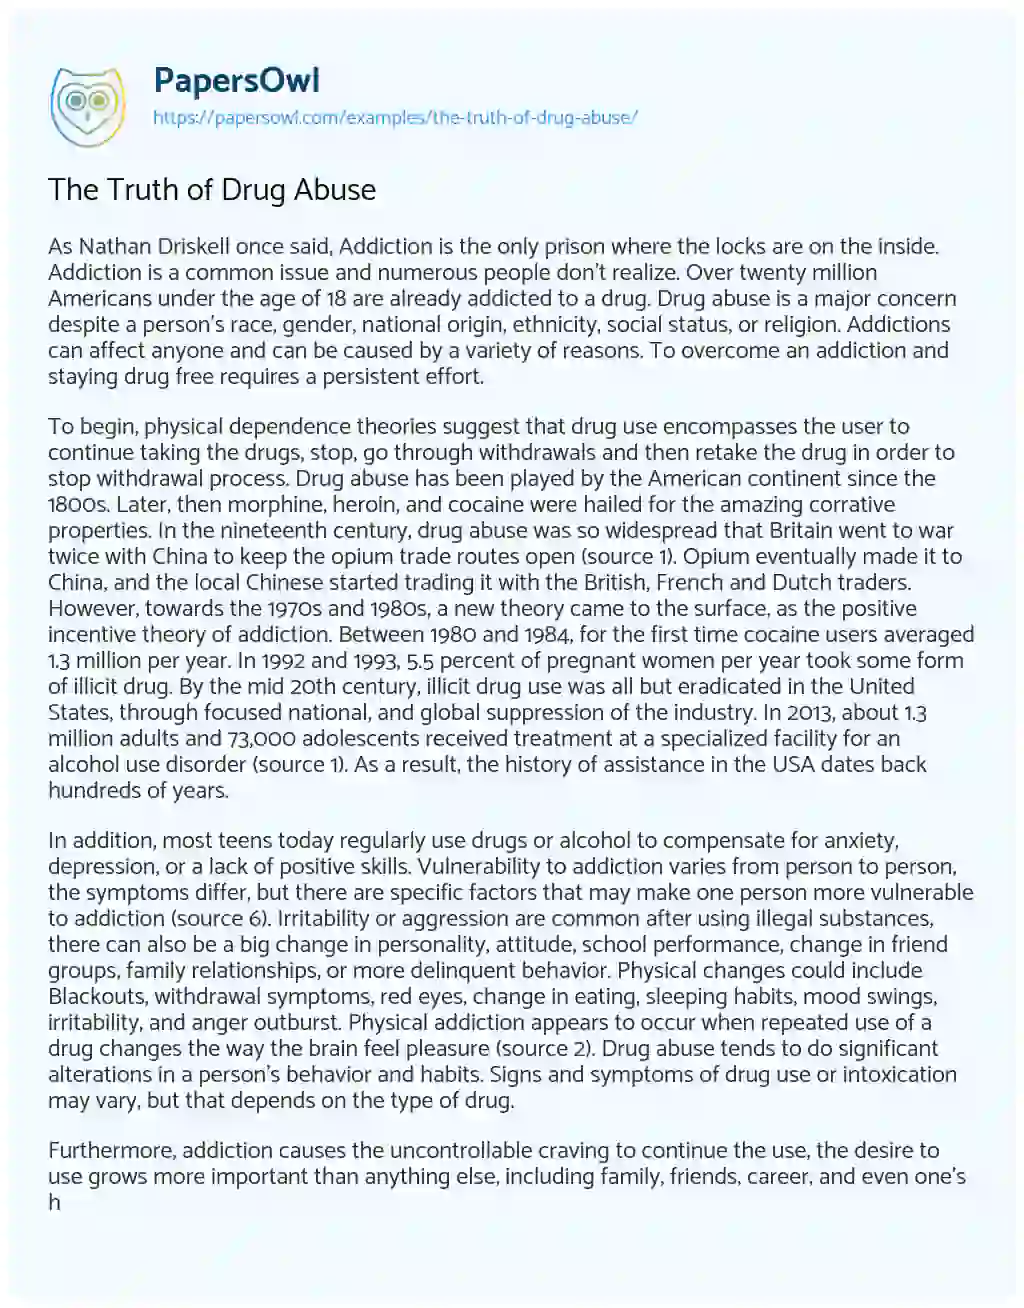 Essay on The Truth of Drug Abuse